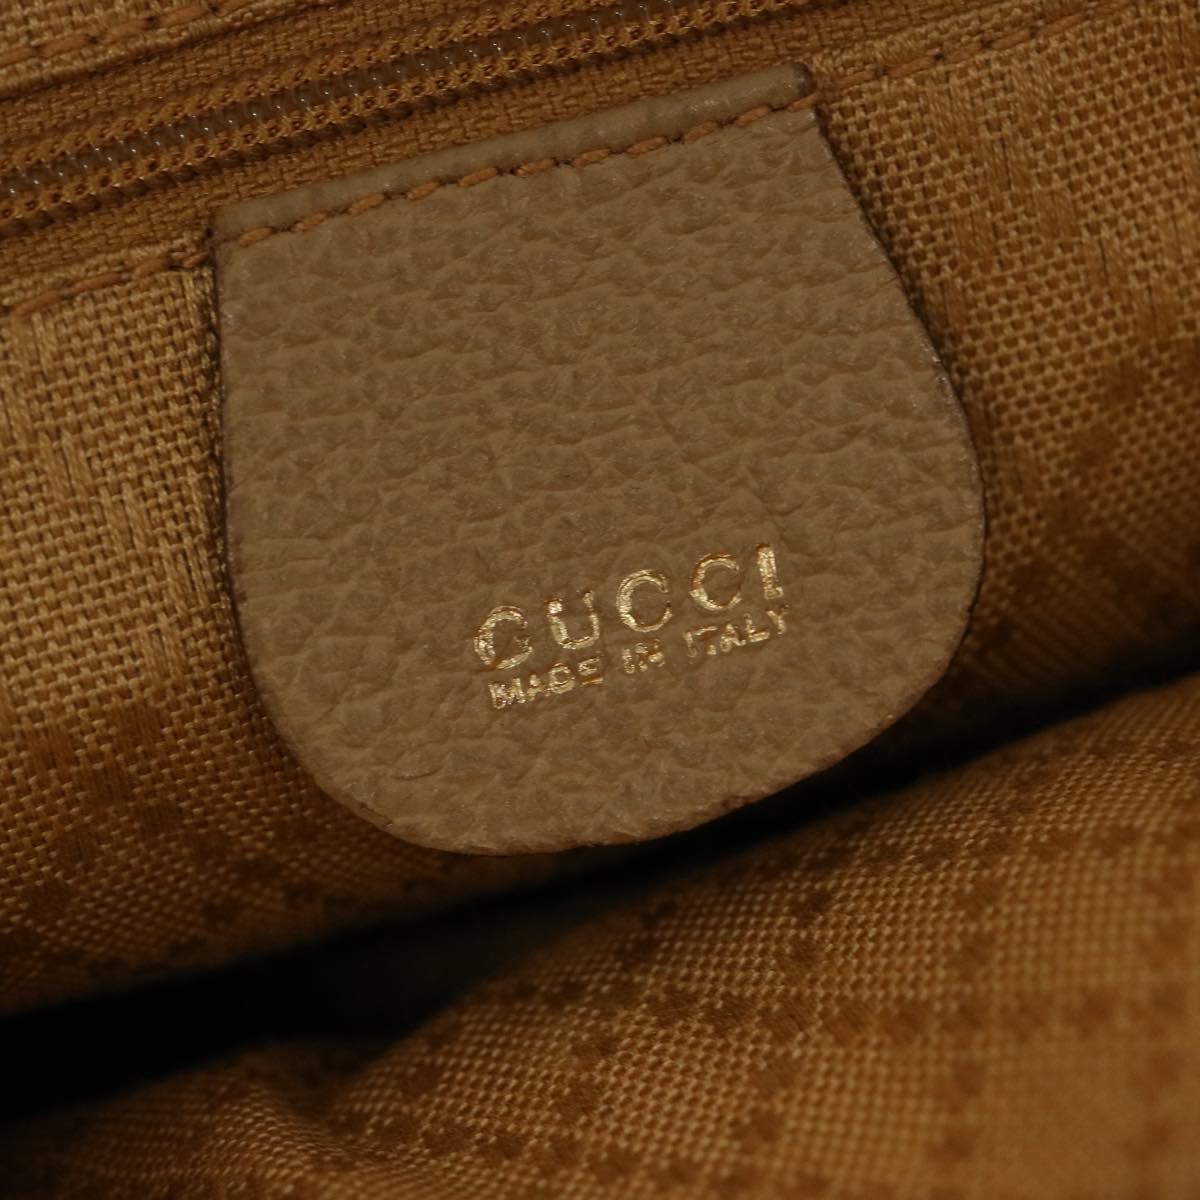 GUCCI Bamboo Hand Bag Suede 2way Beige 007 2032 0231 Auth 75795